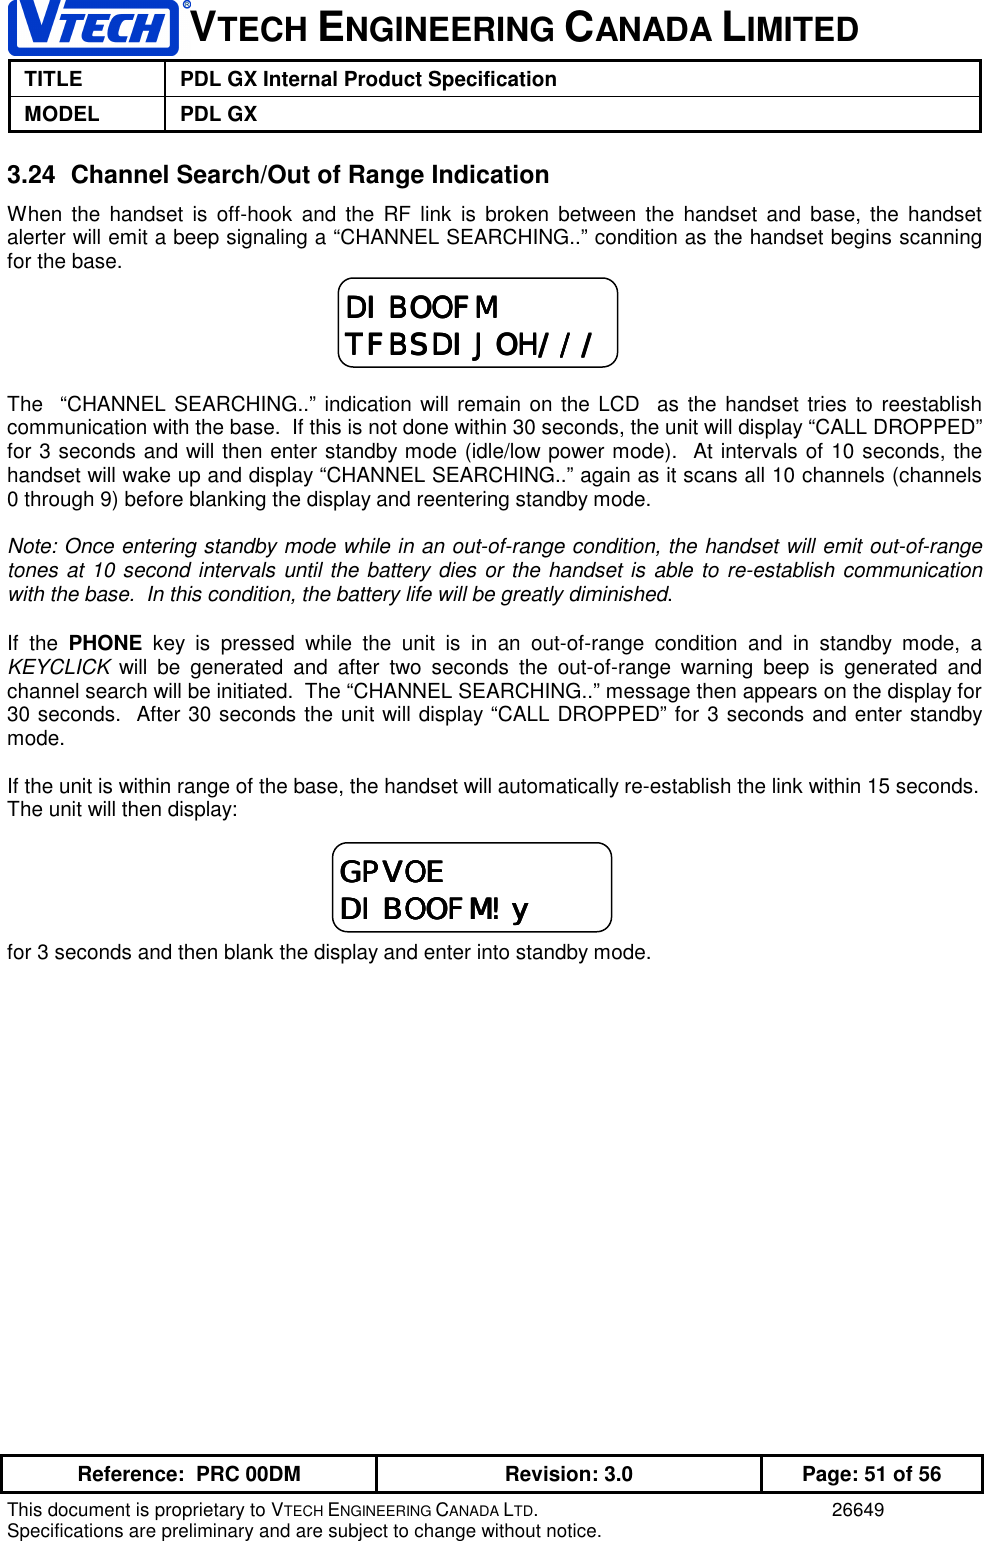 VTECH ENGINEERING CANADA LIMITEDTITLE PDL GX Internal Product SpecificationMODEL PDL GXReference:  PRC 00DM Revision: 3.0 Page: 51 of 56This document is proprietary to VTECH ENGINEERING CANADA LTD. 26649Specifications are preliminary and are subject to change without notice.3.24  Channel Search/Out of Range IndicationWhen the handset is off-hook and the RF link is broken between the handset and base, the handsetalerter will emit a beep signaling a “CHANNEL SEARCHING..” condition as the handset begins scanningfor the base.The  “CHANNEL SEARCHING..” indication will remain on the LCD  as the handset tries to reestablishcommunication with the base.  If this is not done within 30 seconds, the unit will display “CALL DROPPED”for 3 seconds and will then enter standby mode (idle/low power mode).  At intervals of 10 seconds, thehandset will wake up and display “CHANNEL SEARCHING..” again as it scans all 10 channels (channels0 through 9) before blanking the display and reentering standby mode.Note: Once entering standby mode while in an out-of-range condition, the handset will emit out-of-rangetones at 10 second intervals until the battery dies or the handset is able to re-establish communicationwith the base.  In this condition, the battery life will be greatly diminished.If the PHONE key is pressed while the unit is in an out-of-range condition and in standby mode, aKEYCLICK will be generated and after two seconds the out-of-range warning beep is generated andchannel search will be initiated.  The “CHANNEL SEARCHING..” message then appears on the display for30 seconds.  After 30 seconds the unit will display “CALL DROPPED” for 3 seconds and enter standbymode.If the unit is within range of the base, the handset will automatically re-establish the link within 15 seconds.The unit will then display:for 3 seconds and then blank the display and enter into standby mode.DIBOOFMDIBOOFMDIBOOFMDIBOOFMTFBSDIJOH///TFBSDIJOH///TFBSDIJOH///TFBSDIJOH///GPVOEGPVOEGPVOEGPVOEDIBOOFM!yDIBOOFM!yDIBOOFM!yDIBOOFM!y